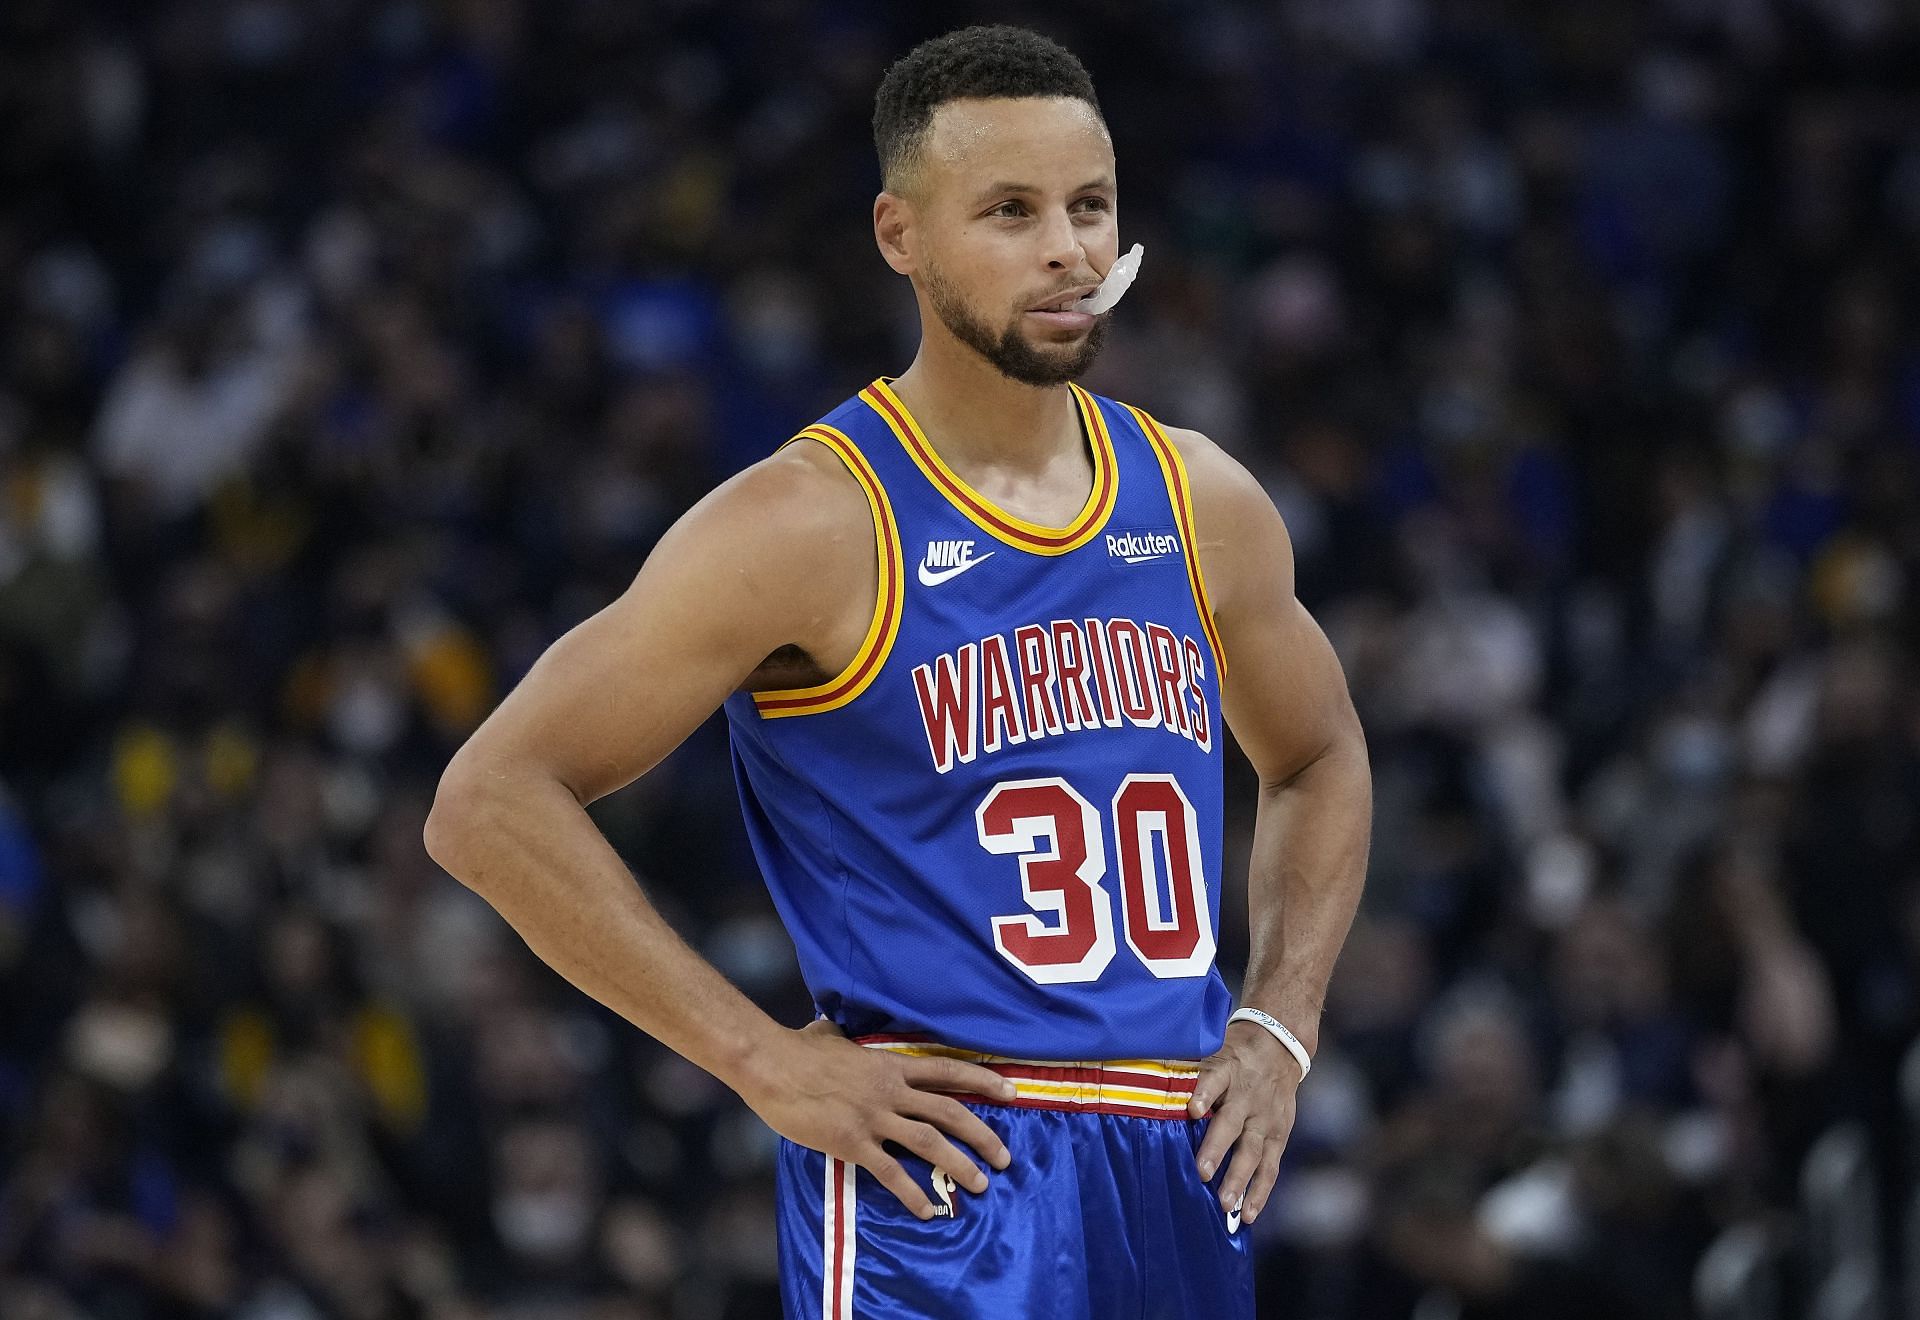 NBA top 75 players of all time: Where does Steph Curry rank now on